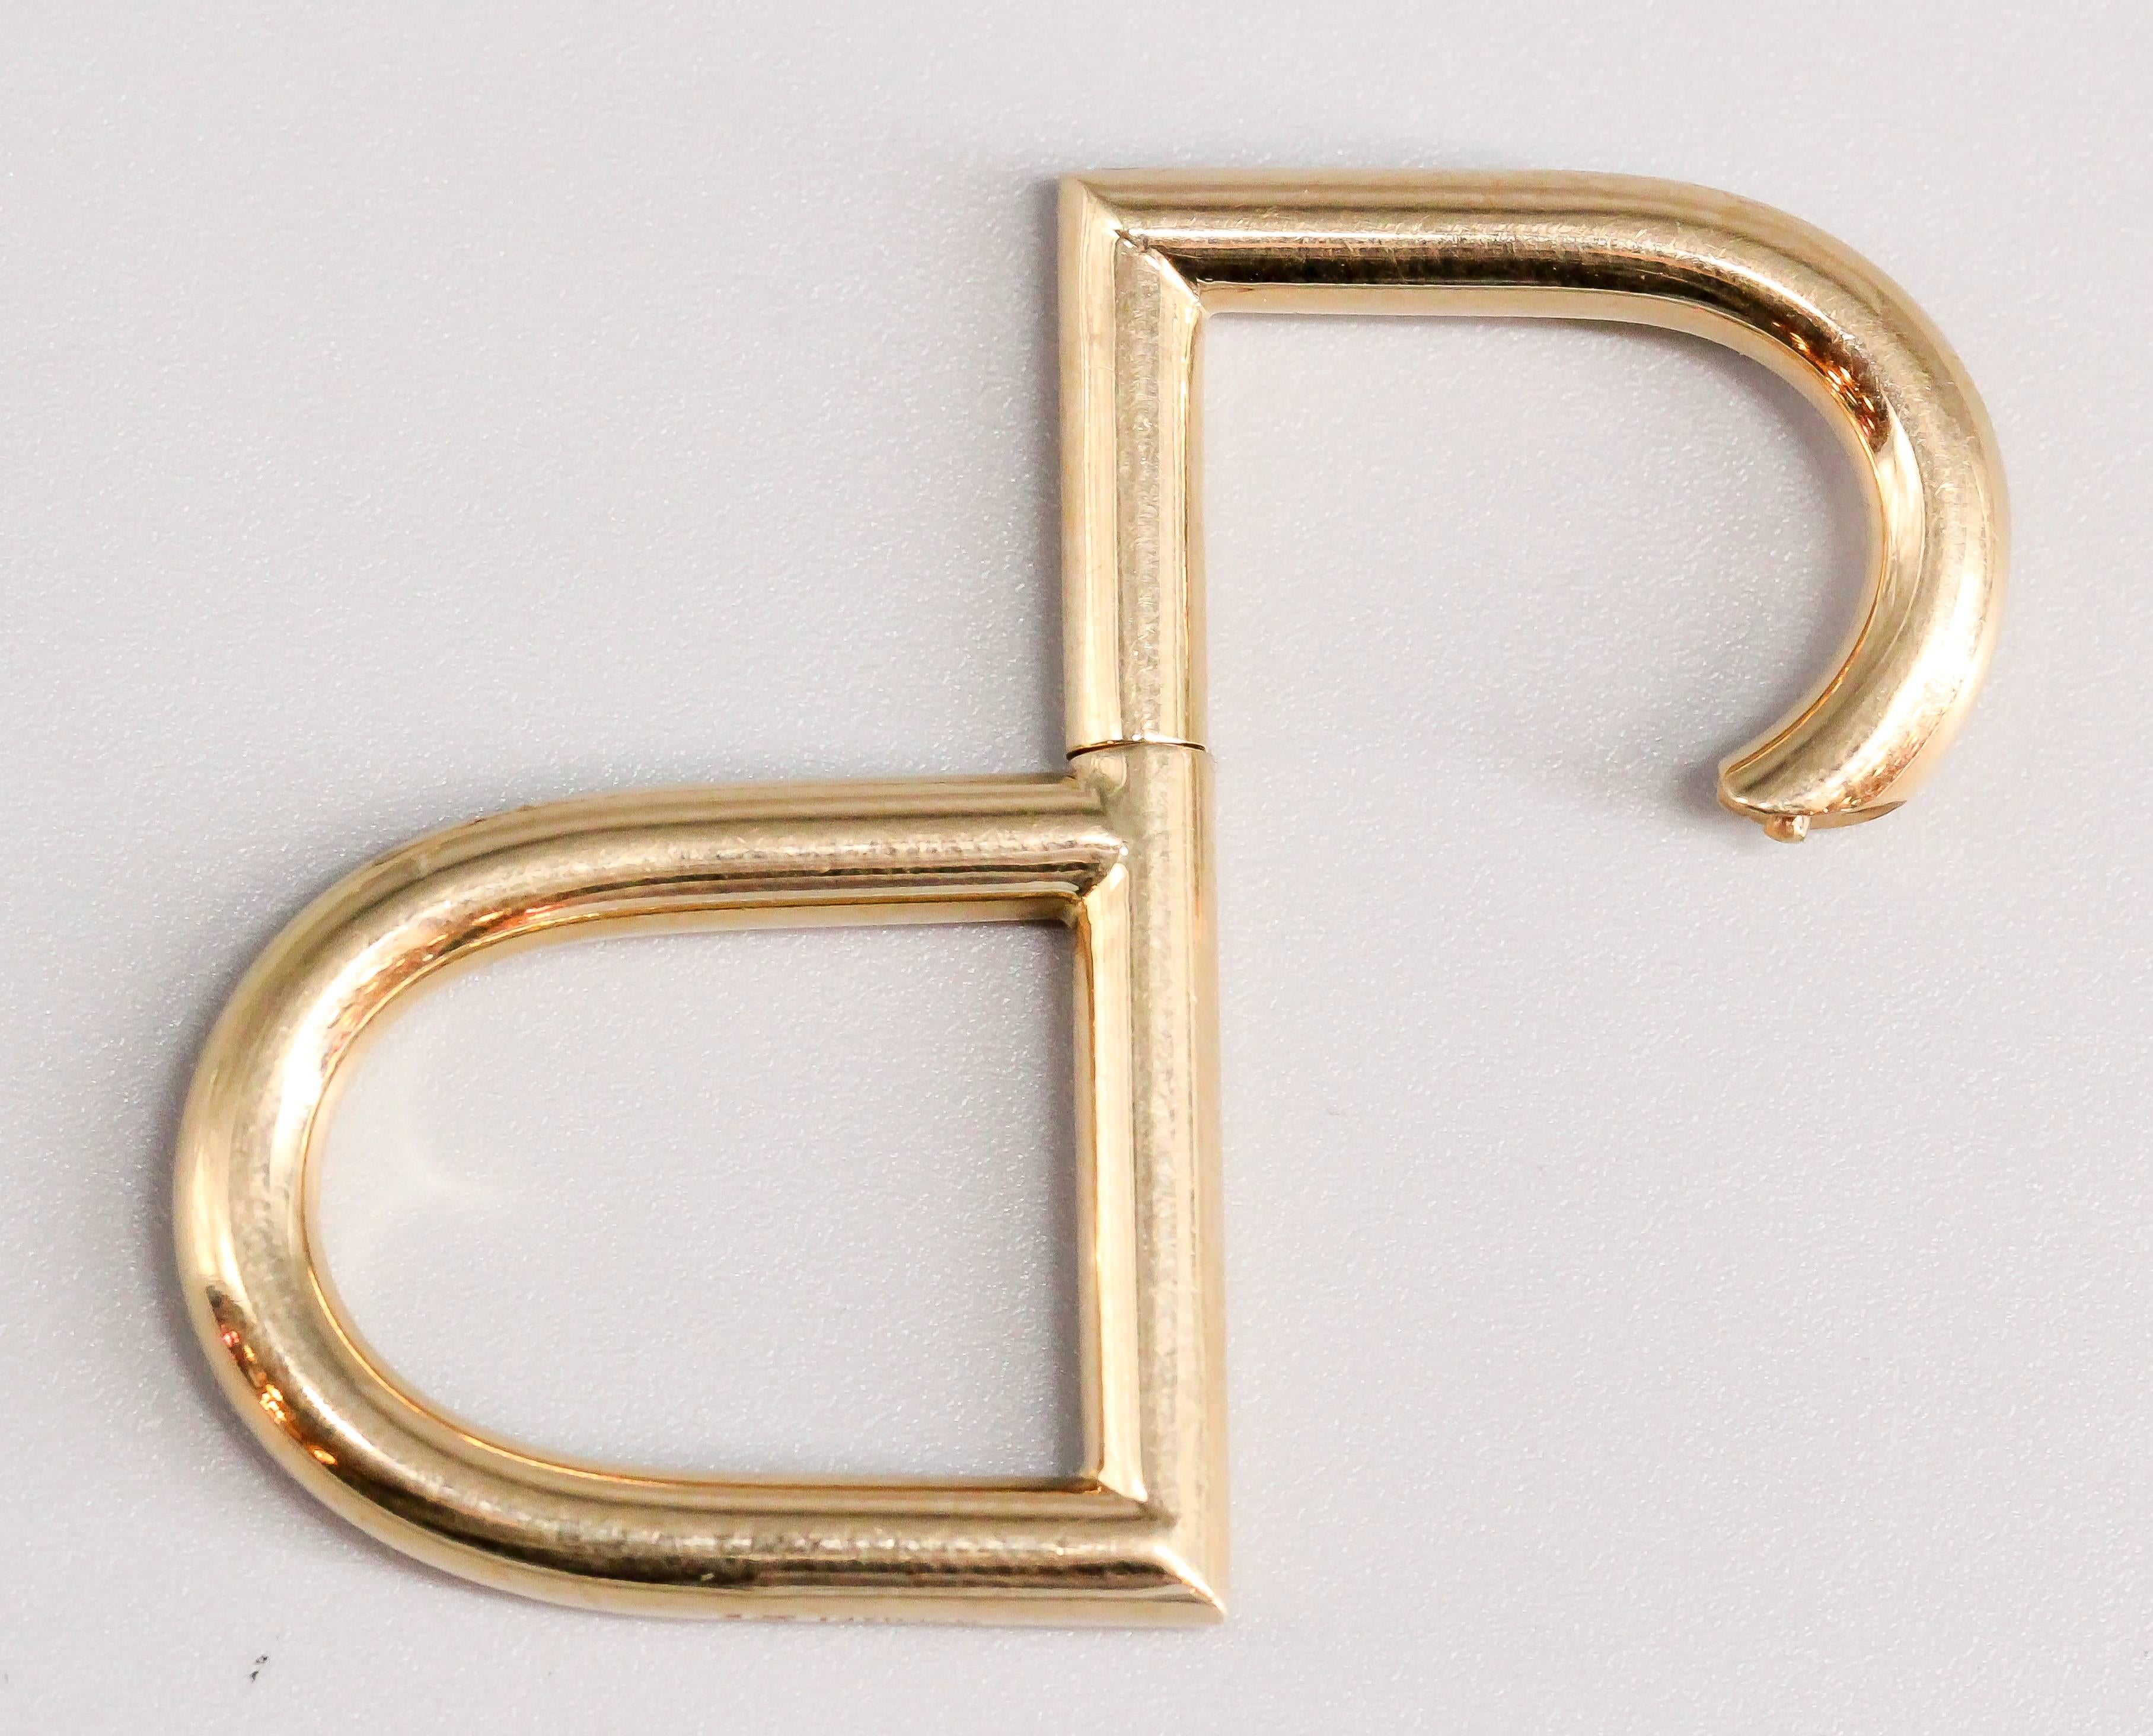 Whimsical 18K yellow gold keychain by Bulgari. It resembles the letter 